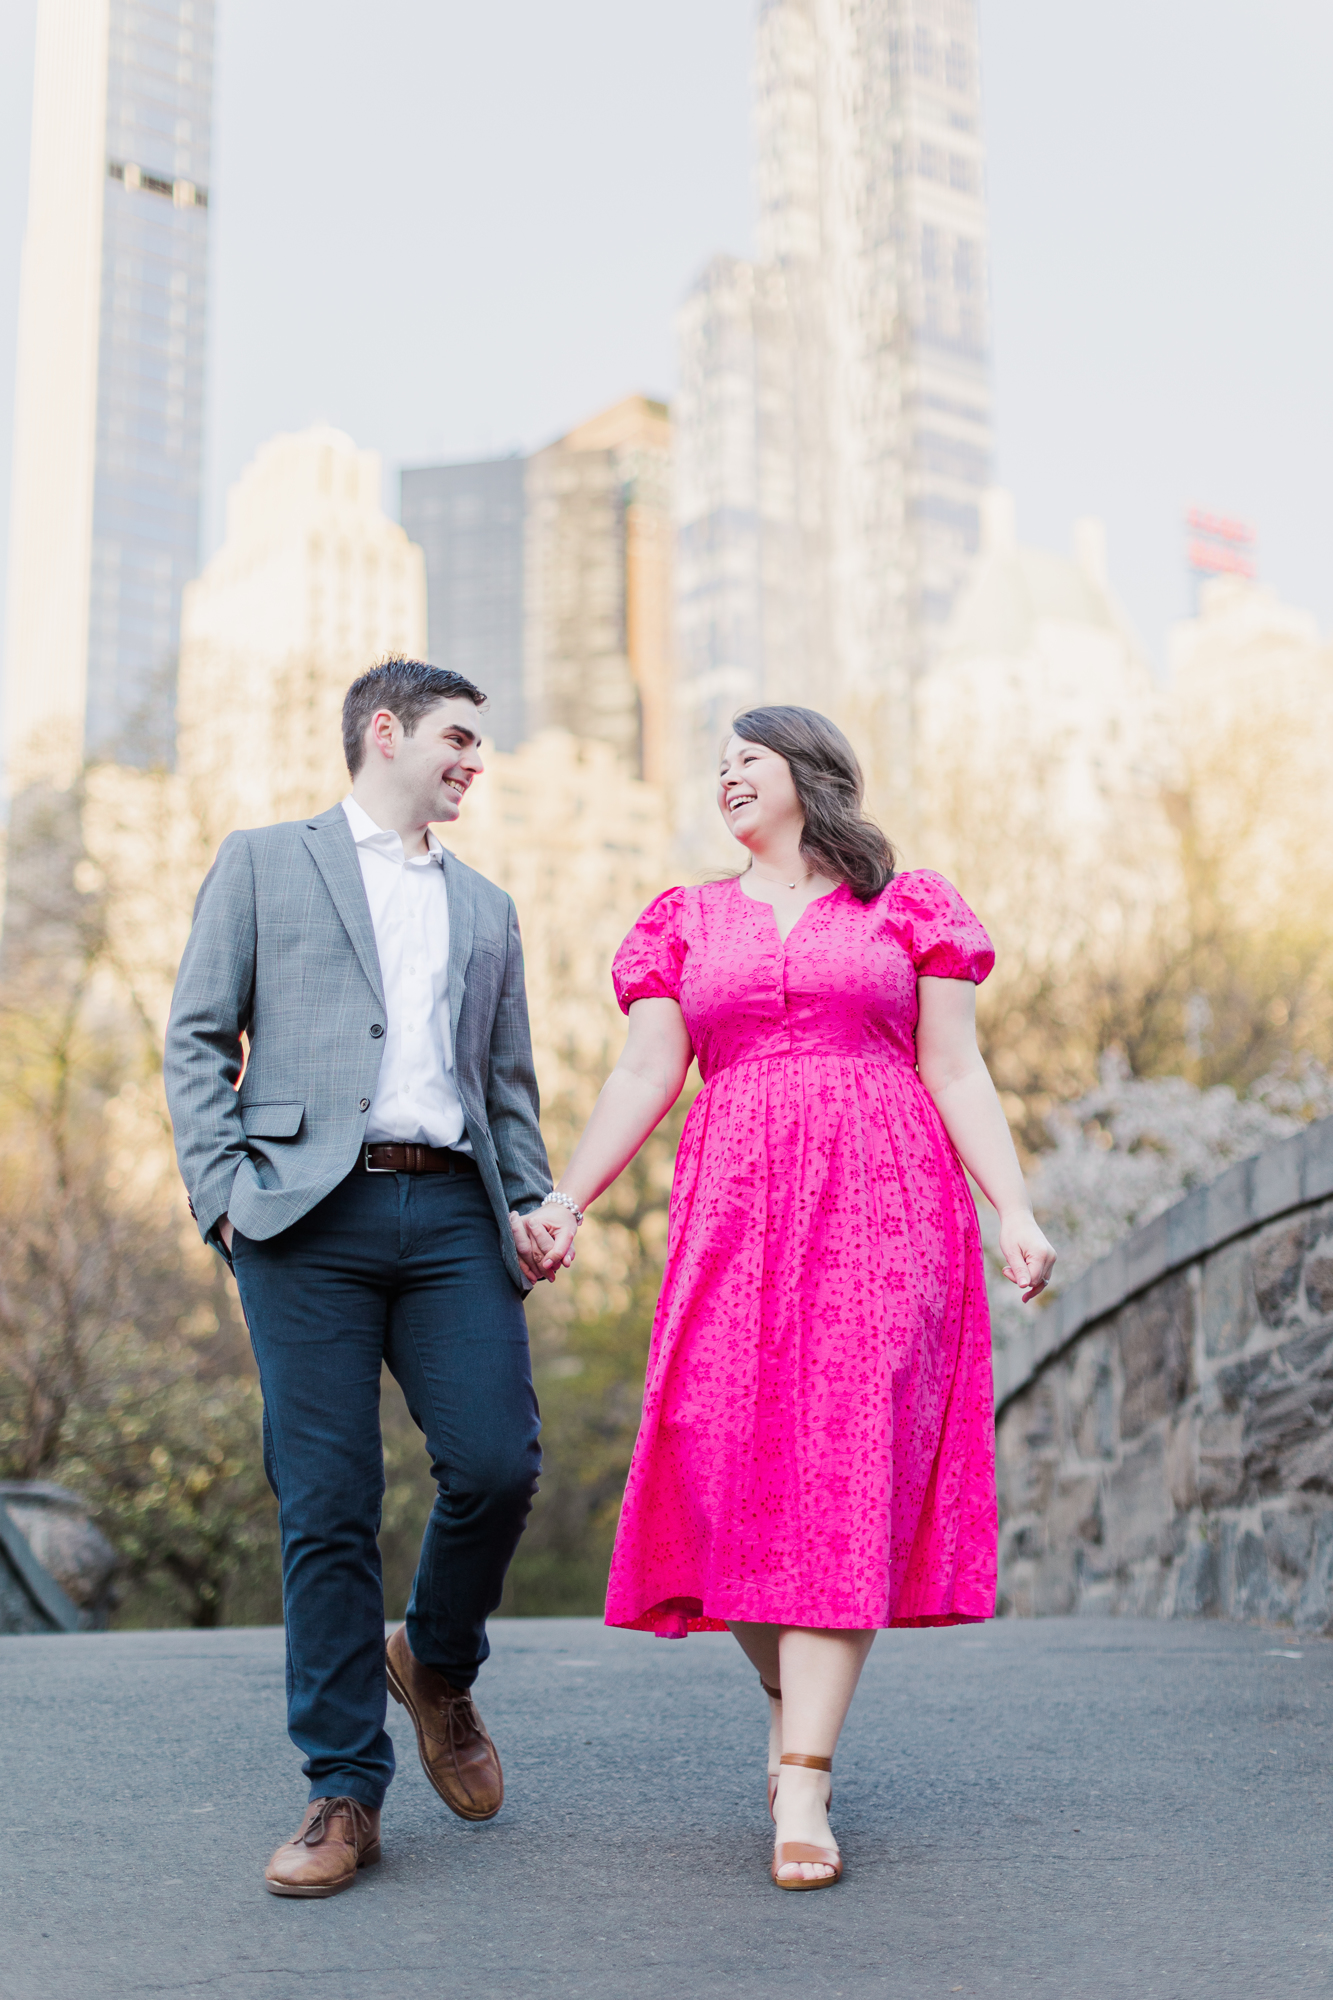 Lively Pose Ideas for your Engagement Session